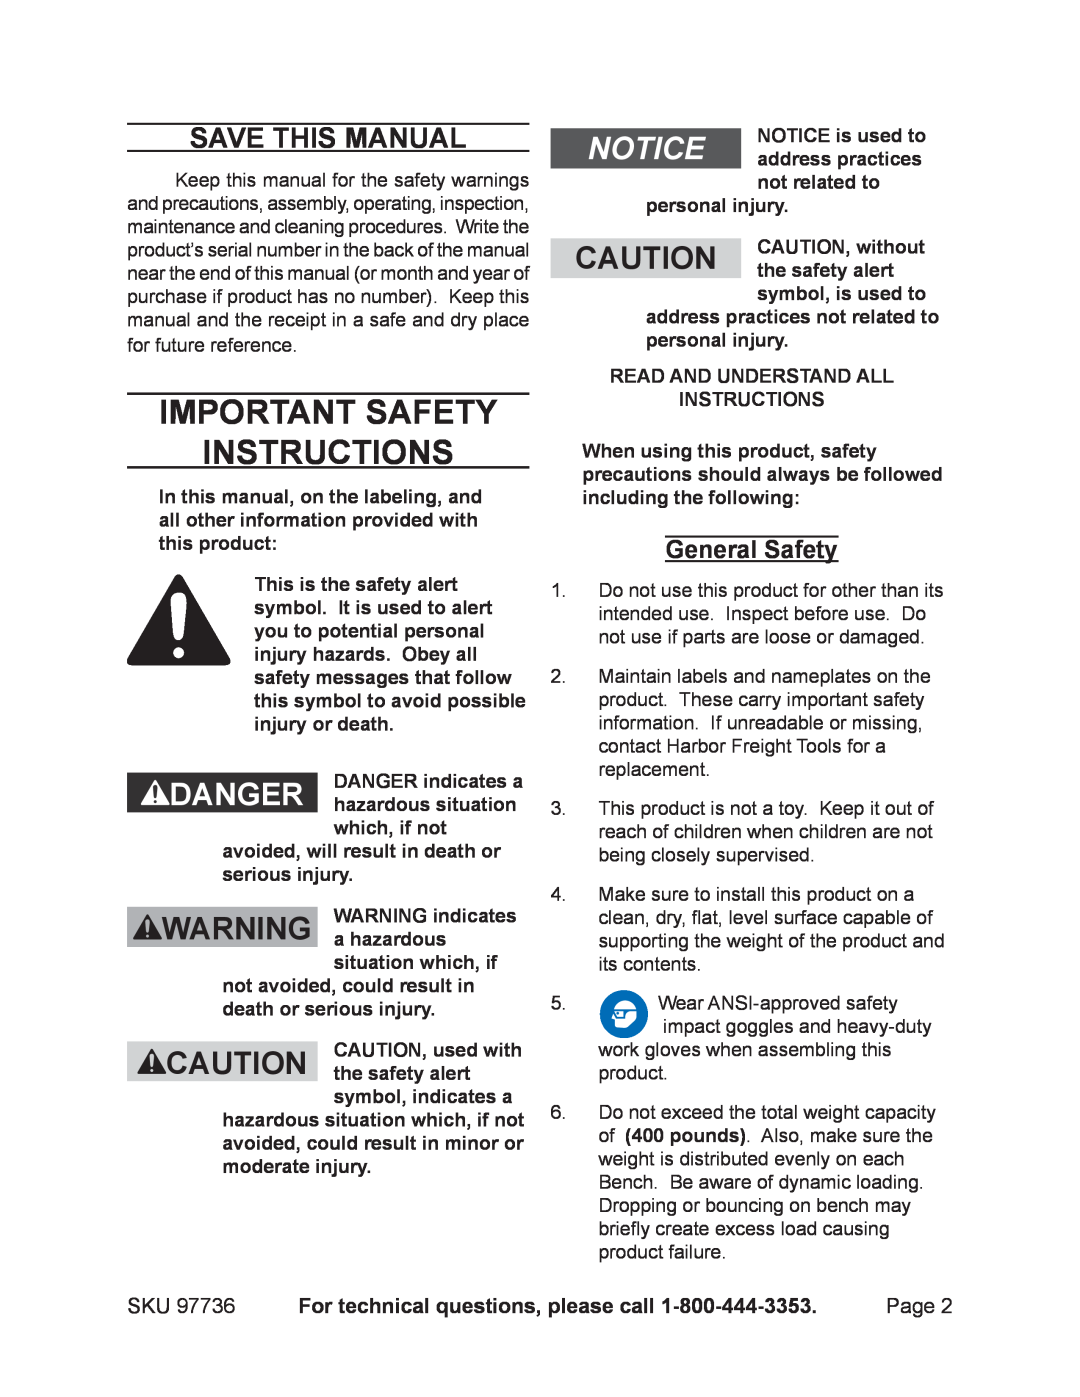 Harbor Freight Tools 97736 Important Safety Instructions, Save This Manual, For technical questions, please call, Danger 